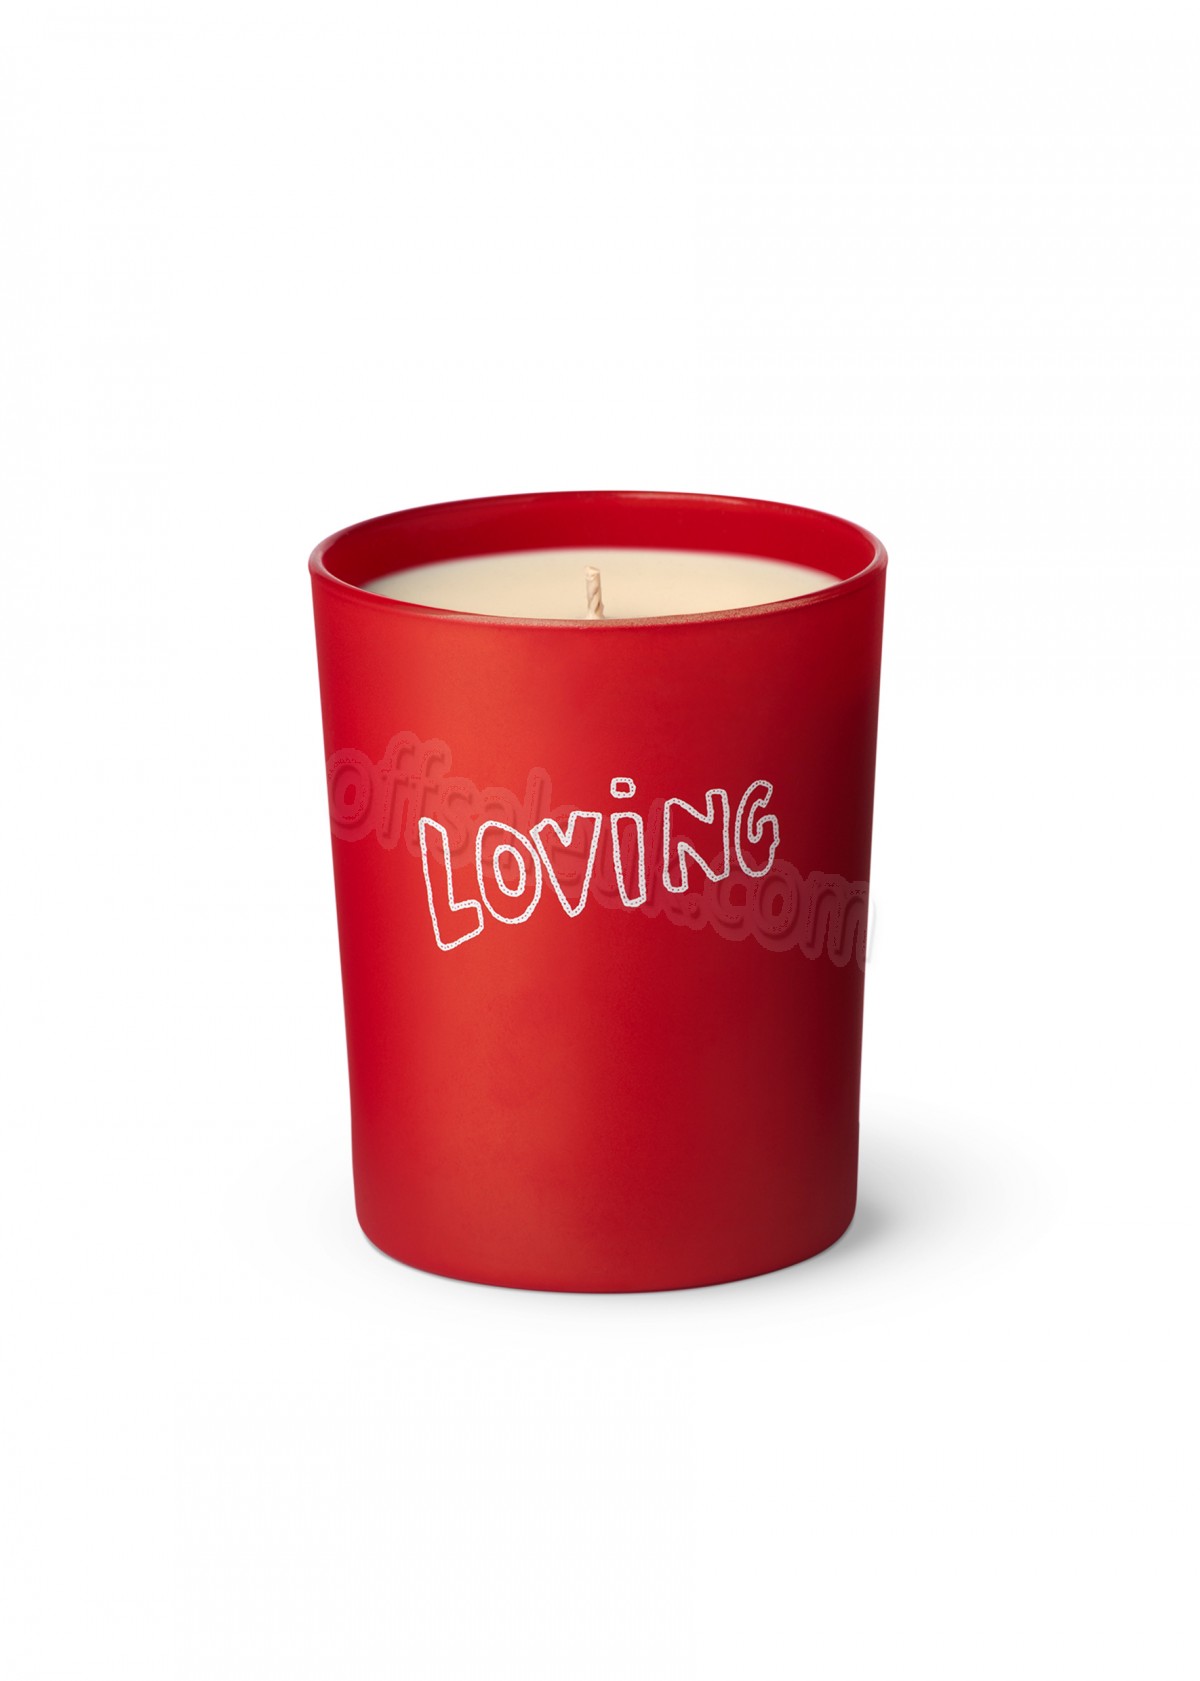 Cheap Loving Candle - -0